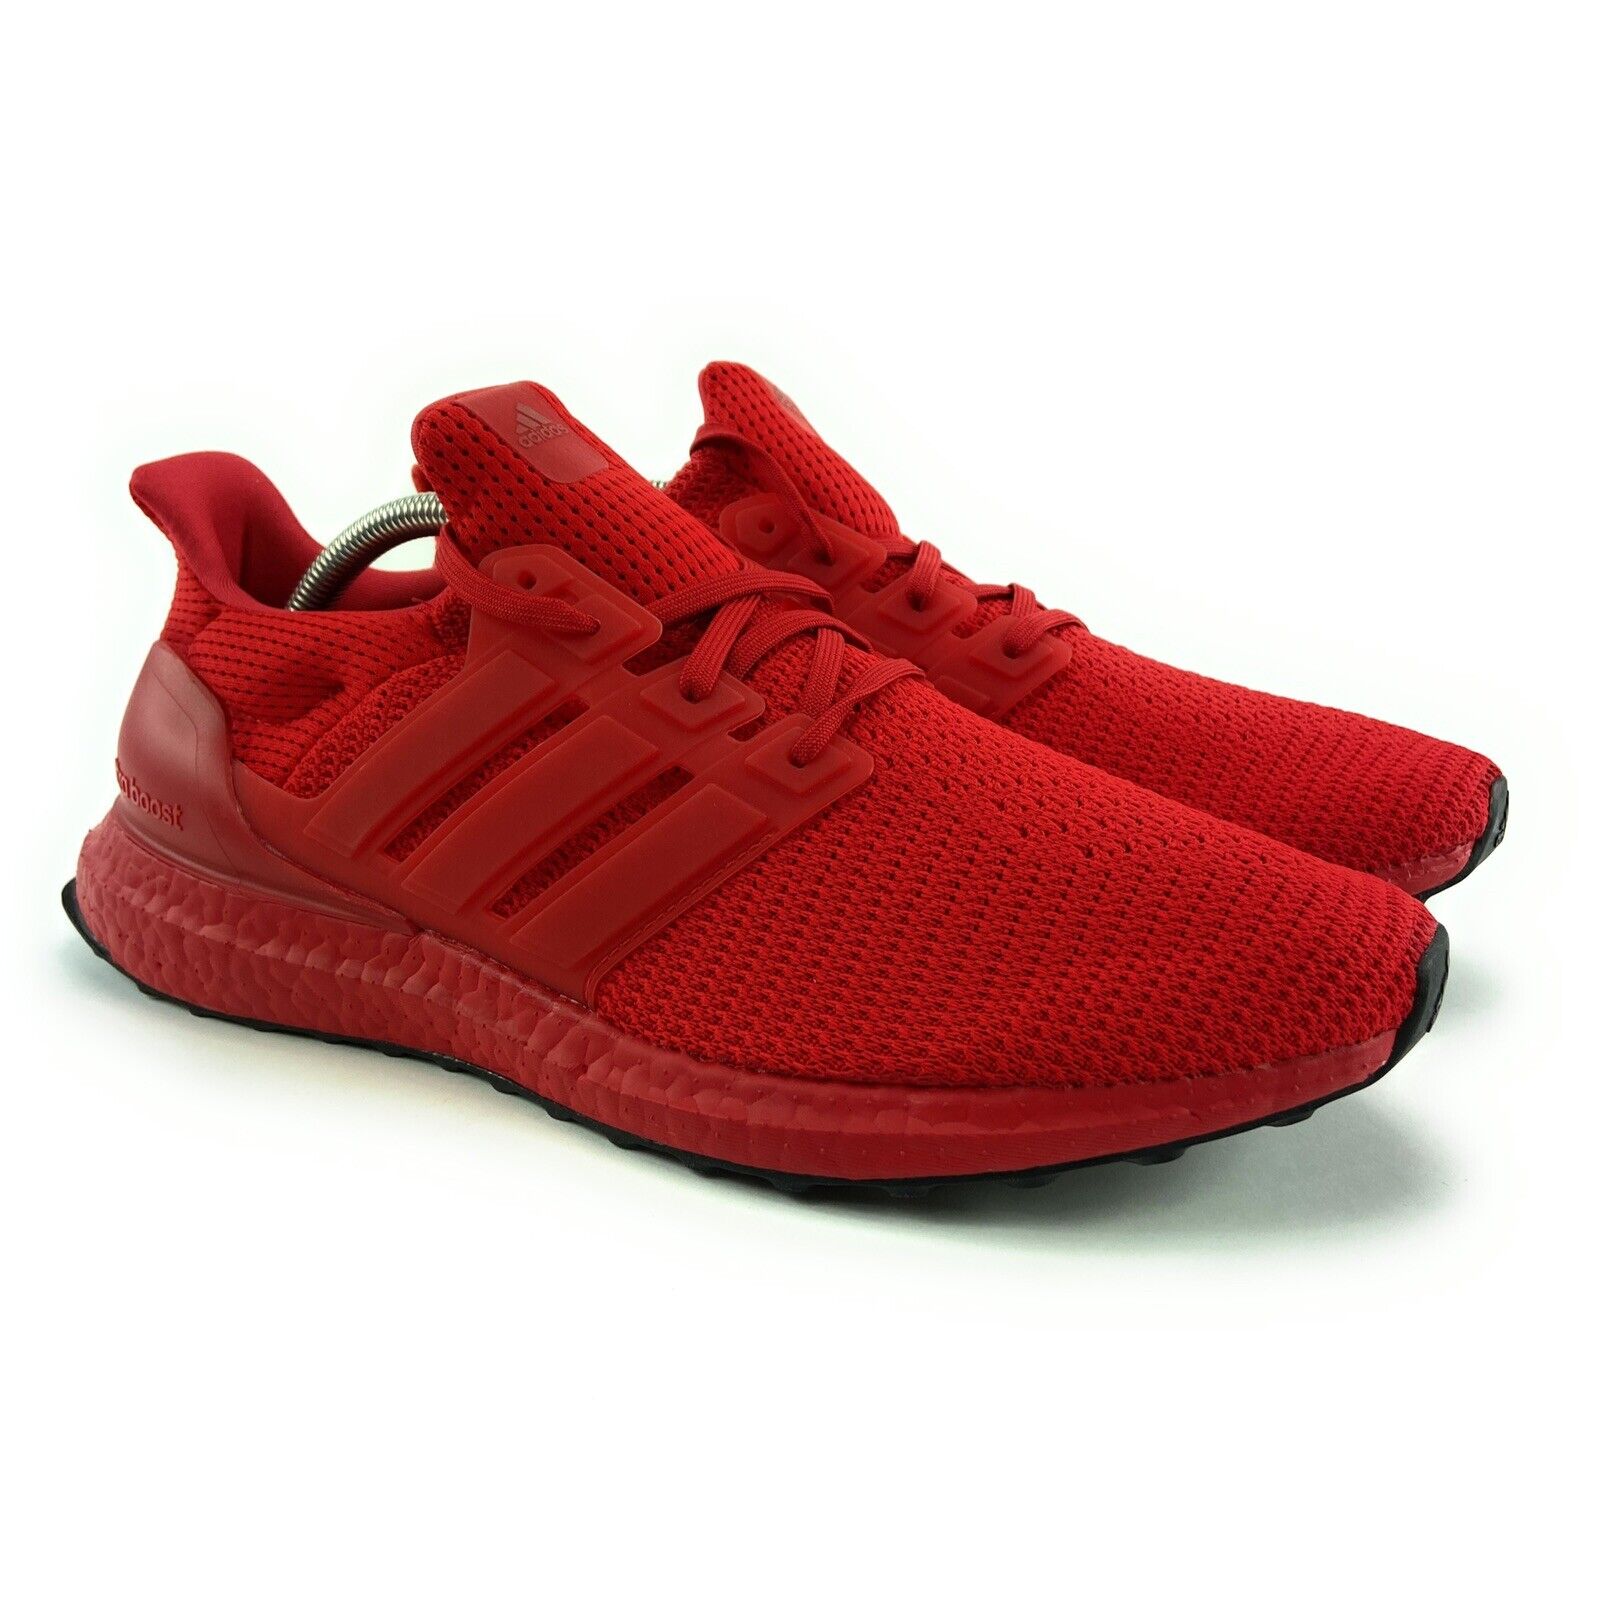 Orient Consent Inhibit Adidas Men's Ultraboost Scarlet Triple Red Running Shoes FY7123 Sizes 7.5 -  11 | eBay